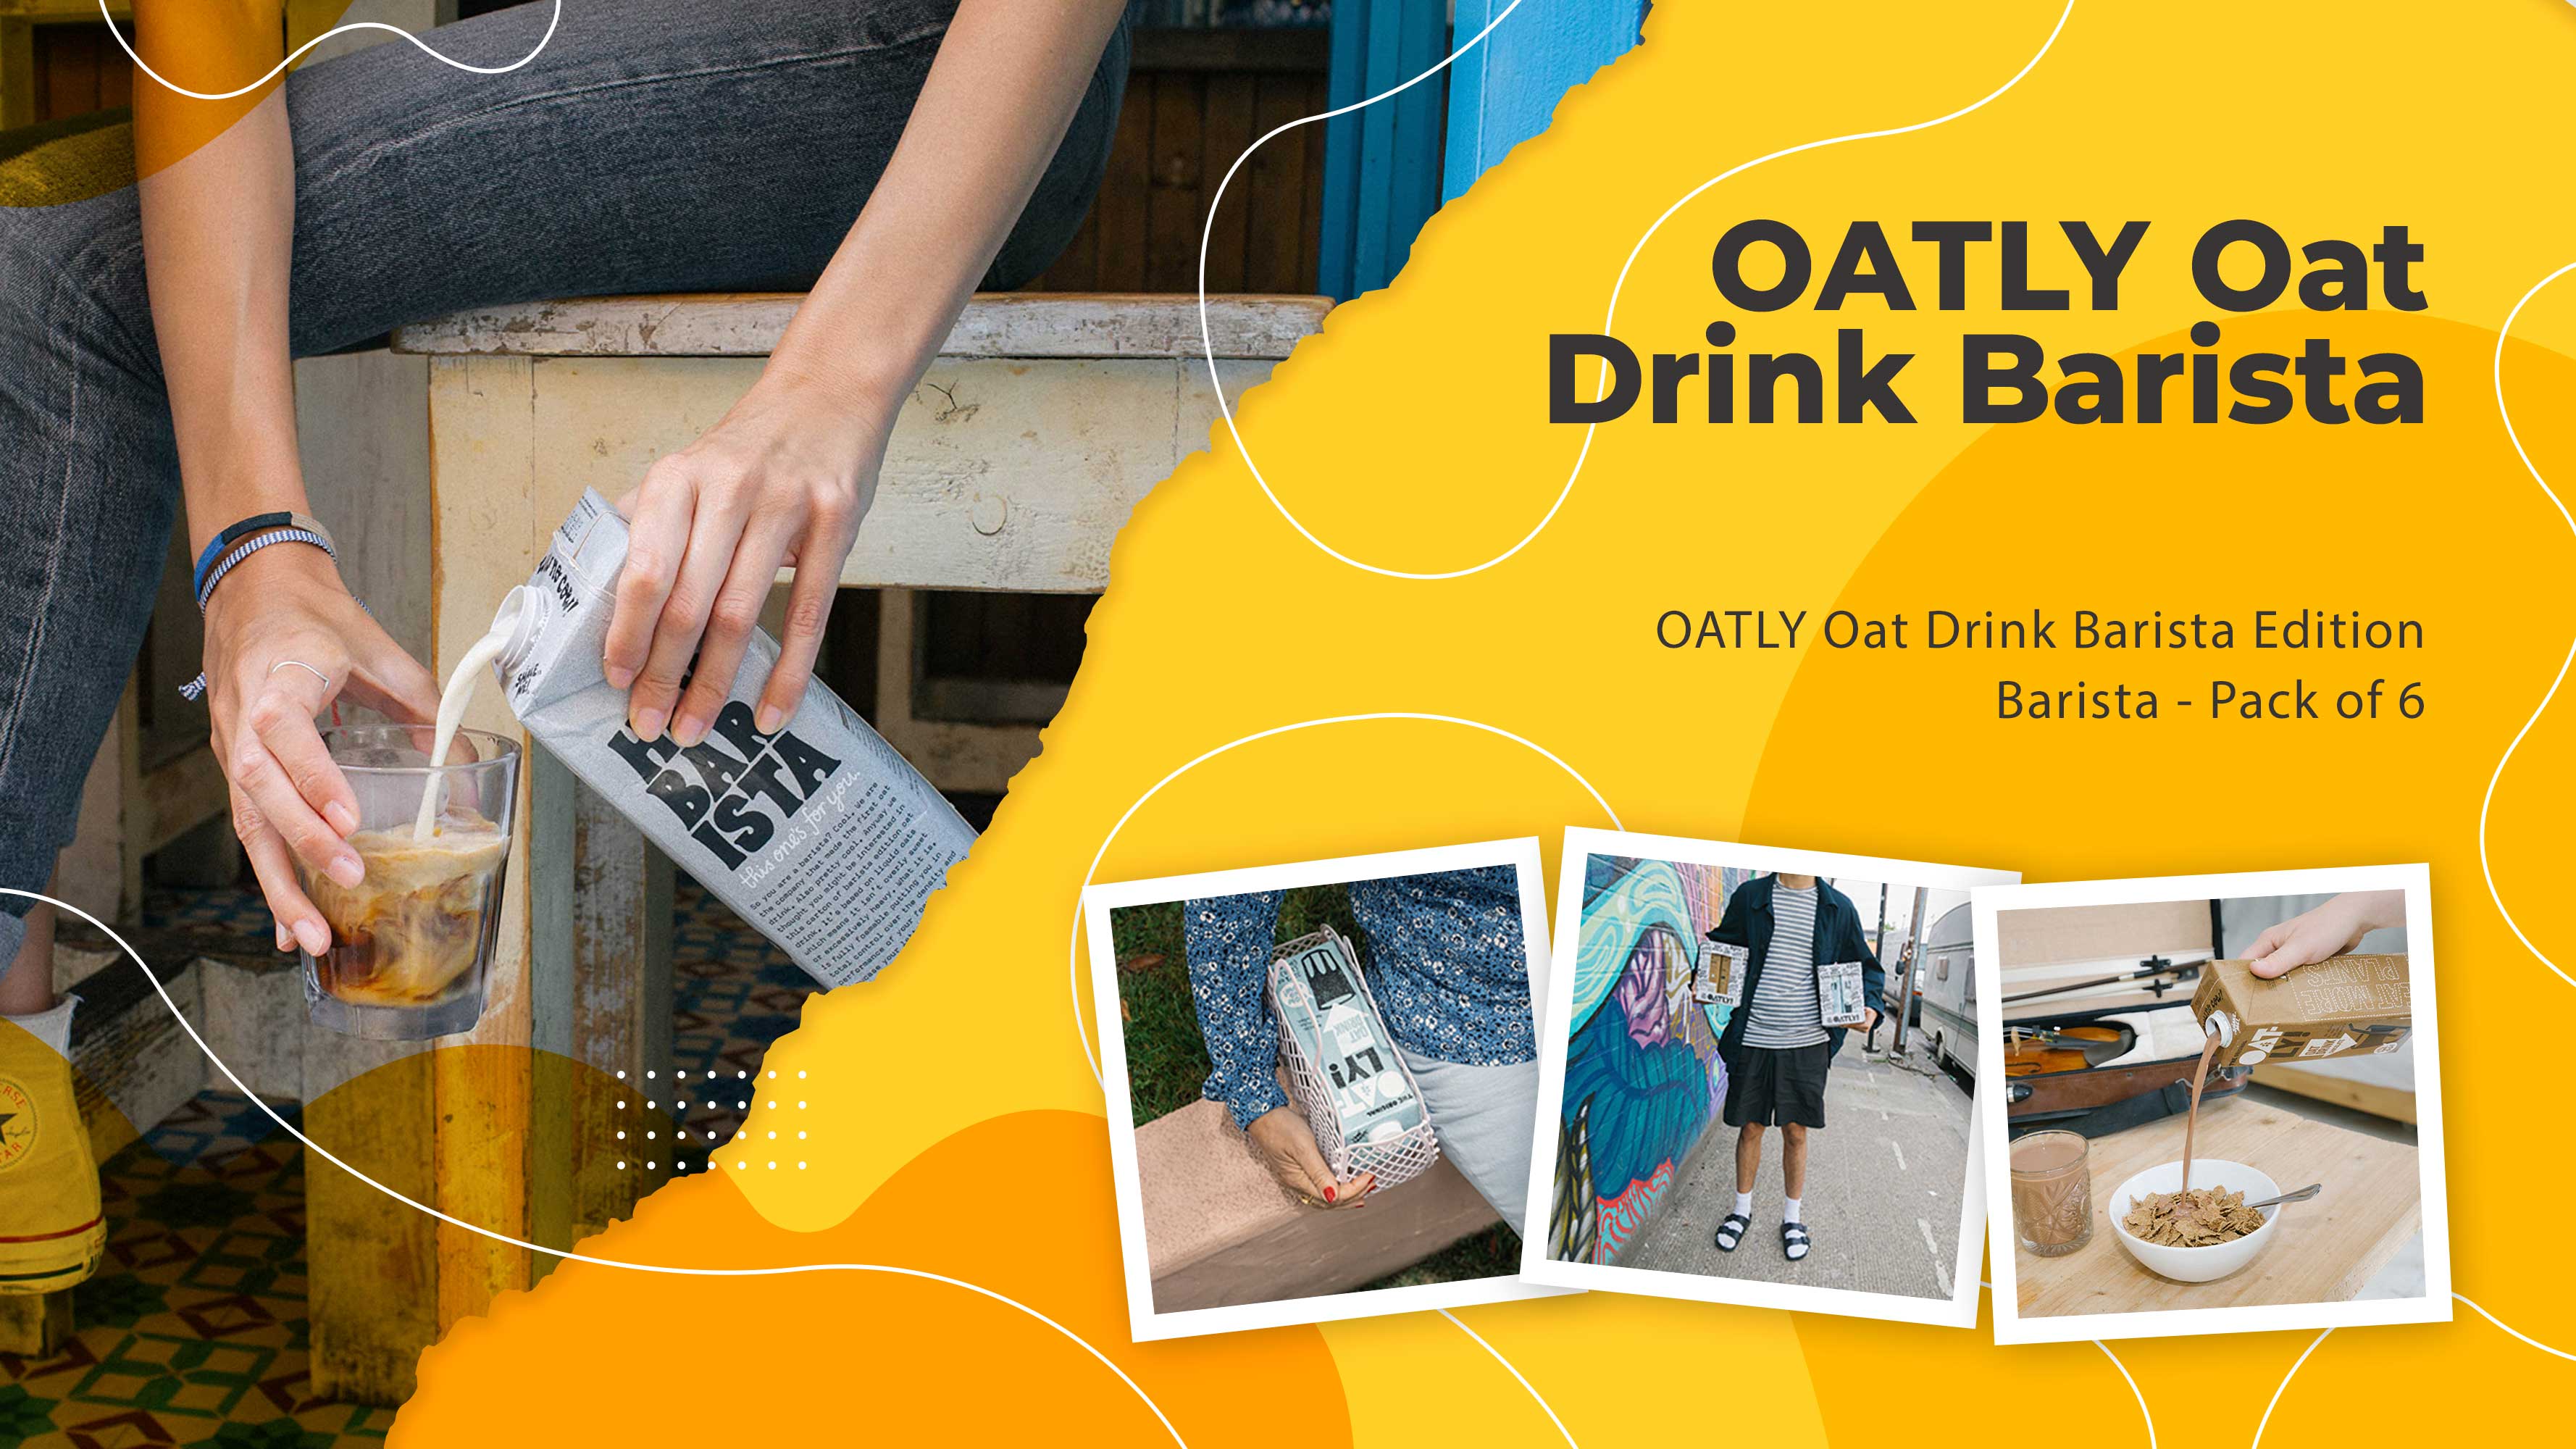 OATLY-Oat-Drink-Barista-Edition---Barista---Pack-of-6.jpg?1668032223678